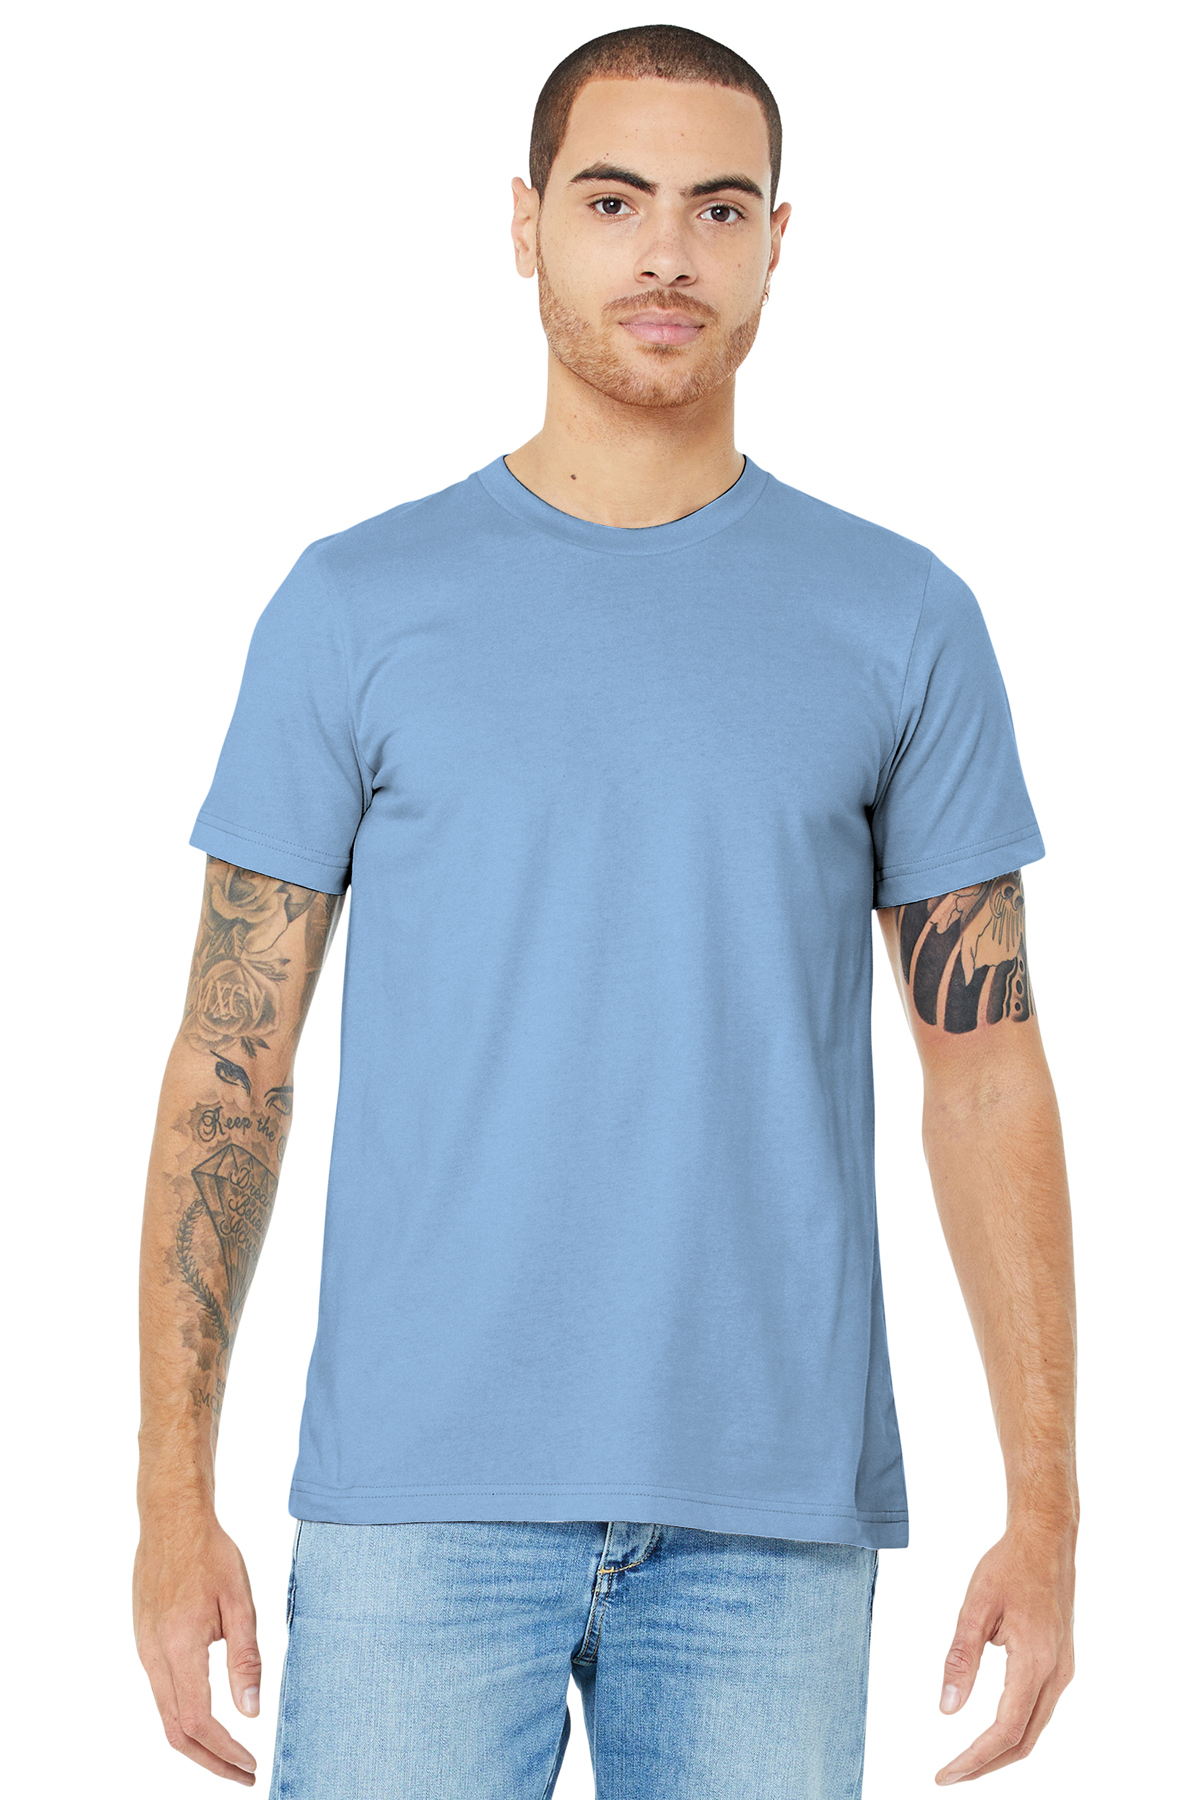 Fall is My Signature Color Bella Canvas 3001 T-Shirt